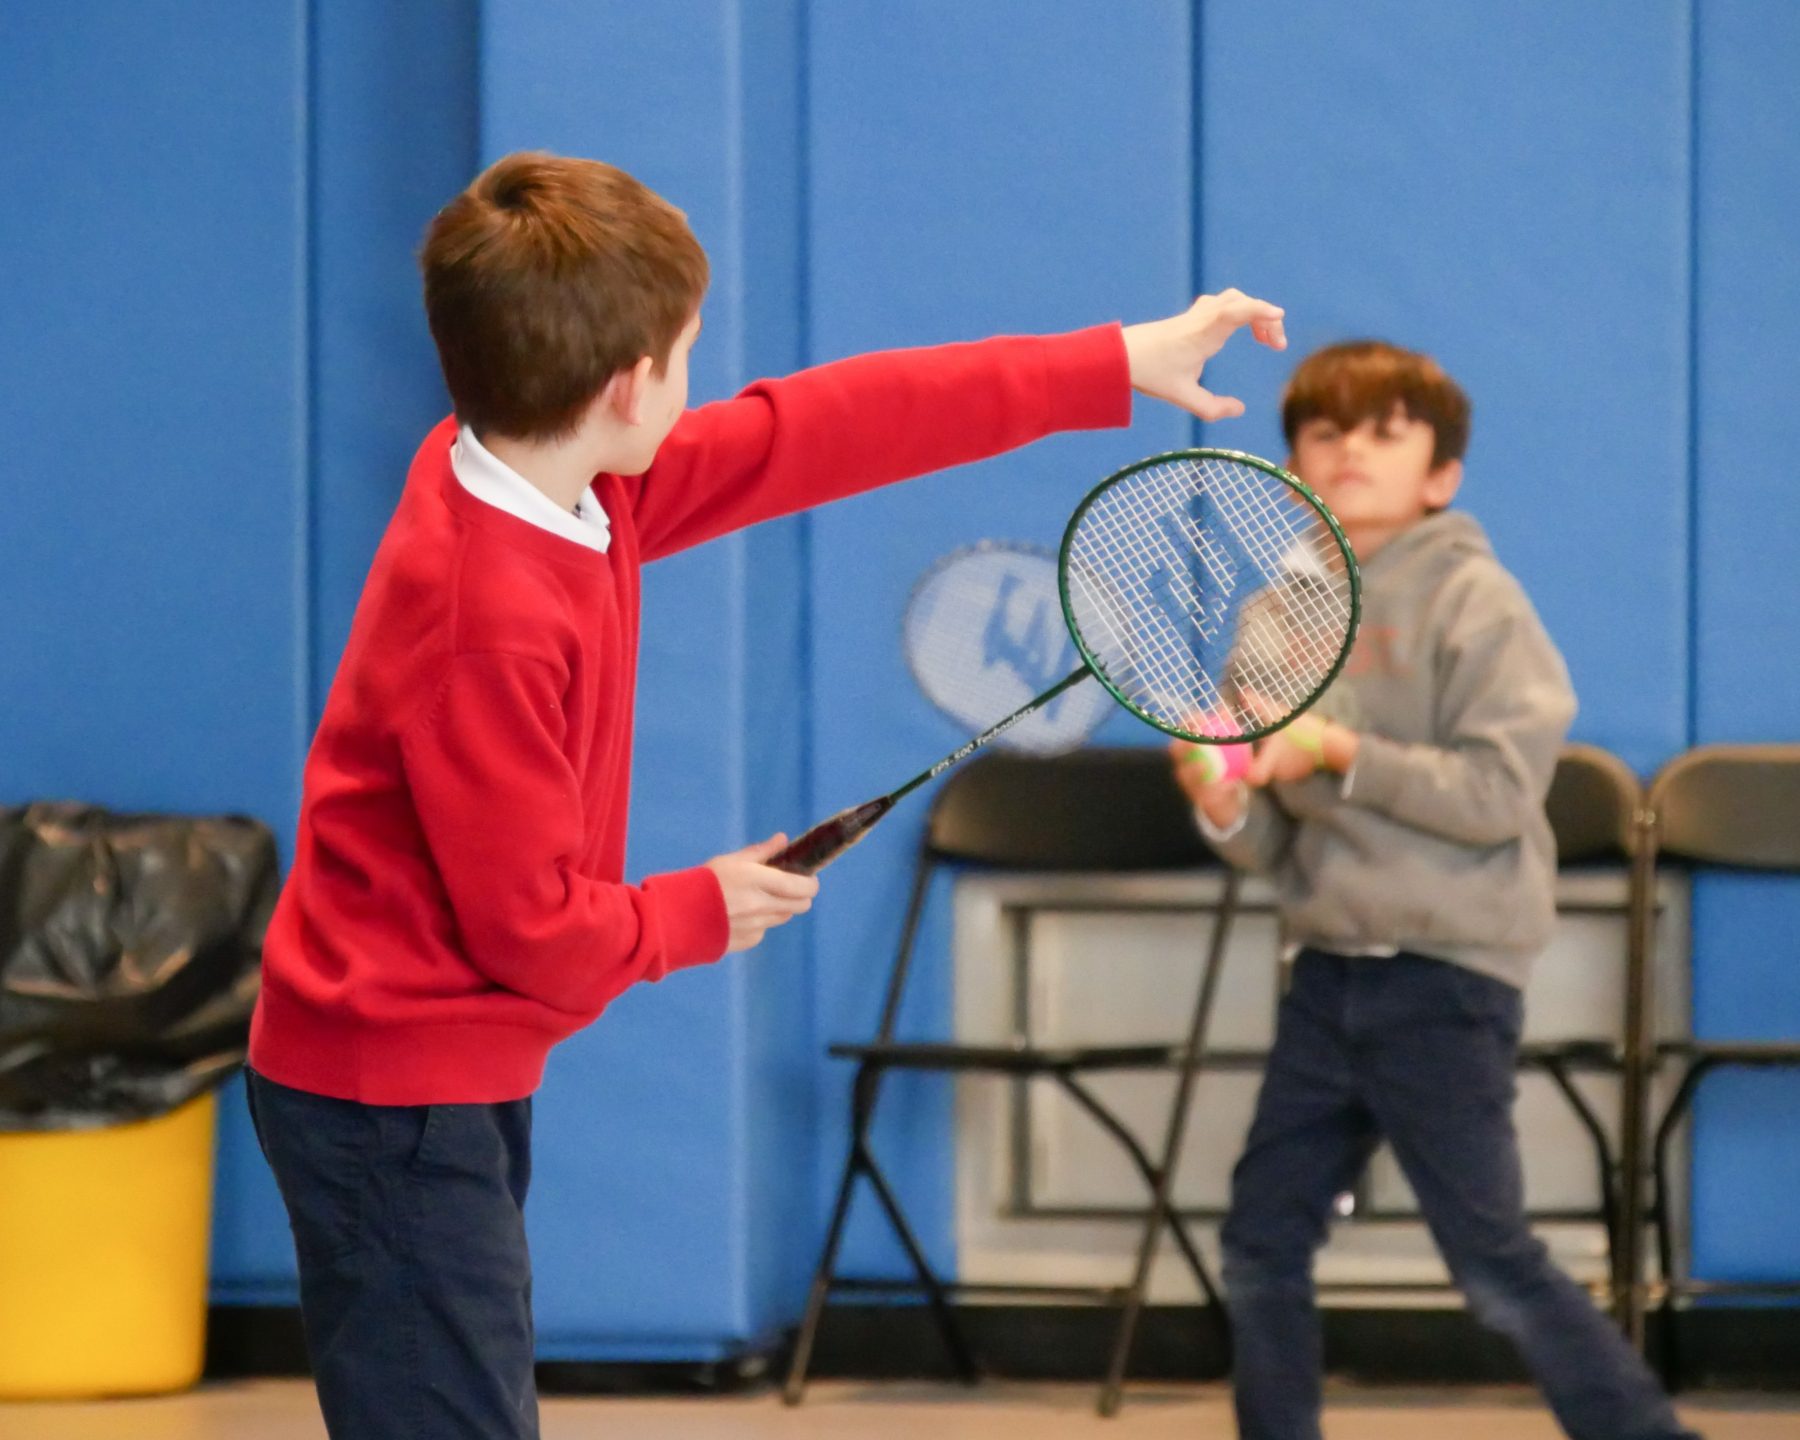 Students playing badminton in a gym.